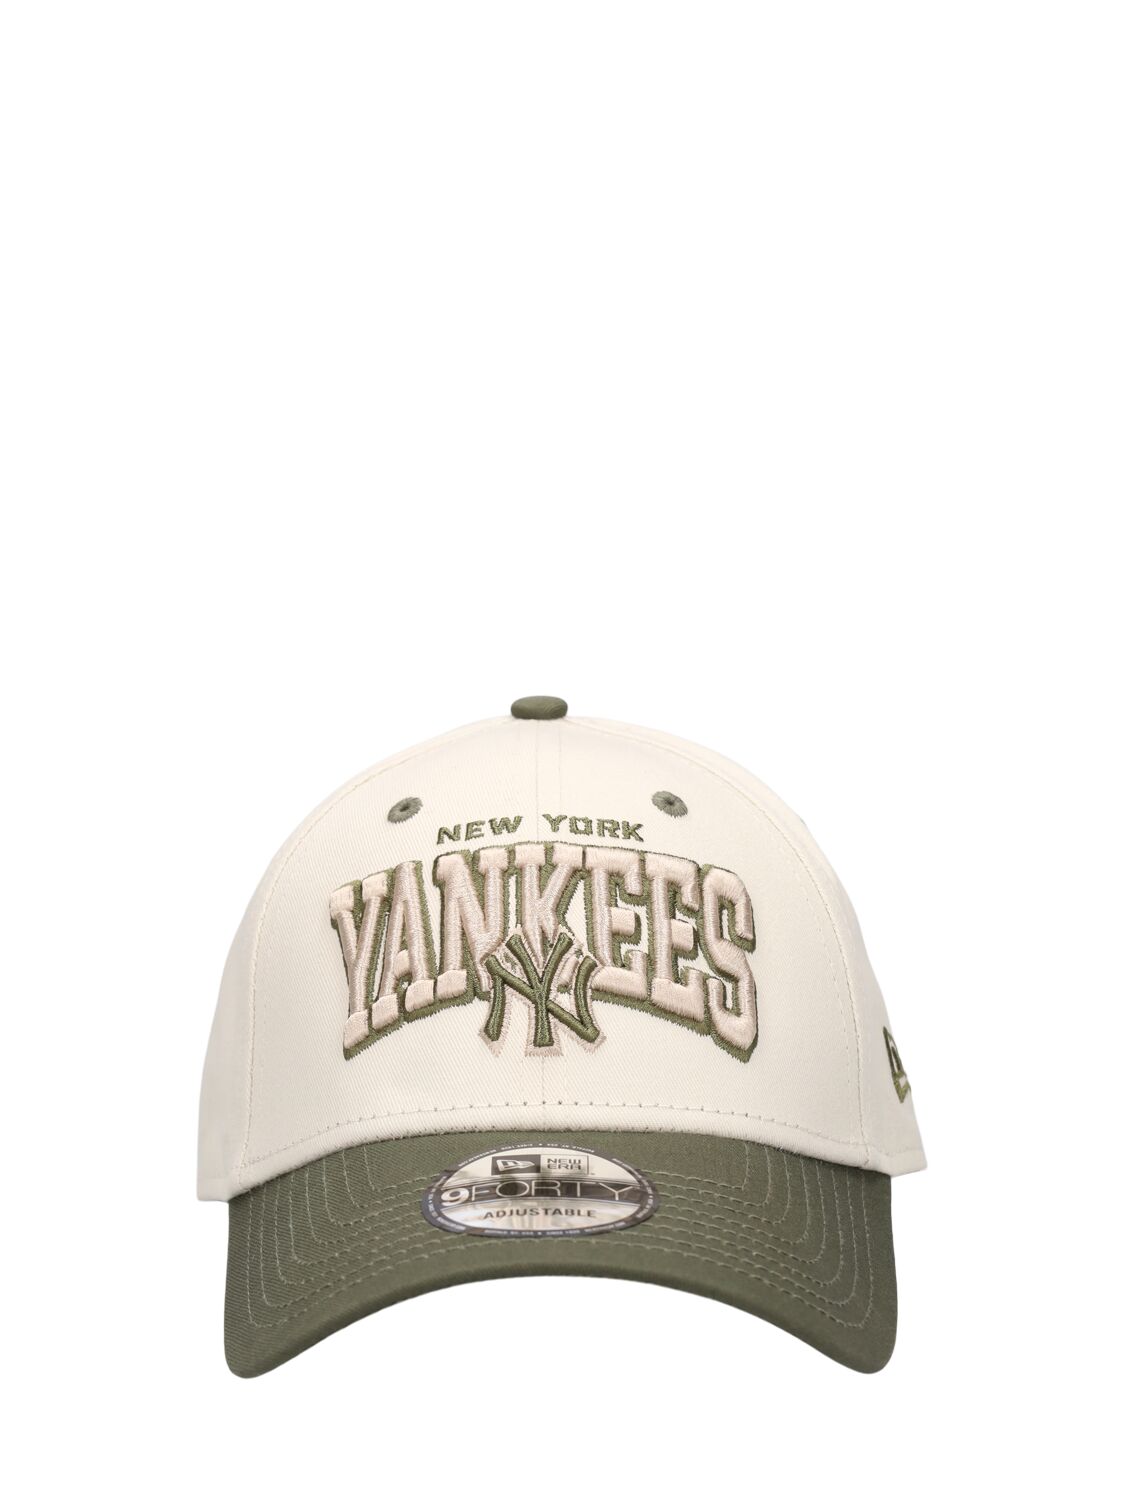 Image of Ny Yankees White Crown 9forty Cap